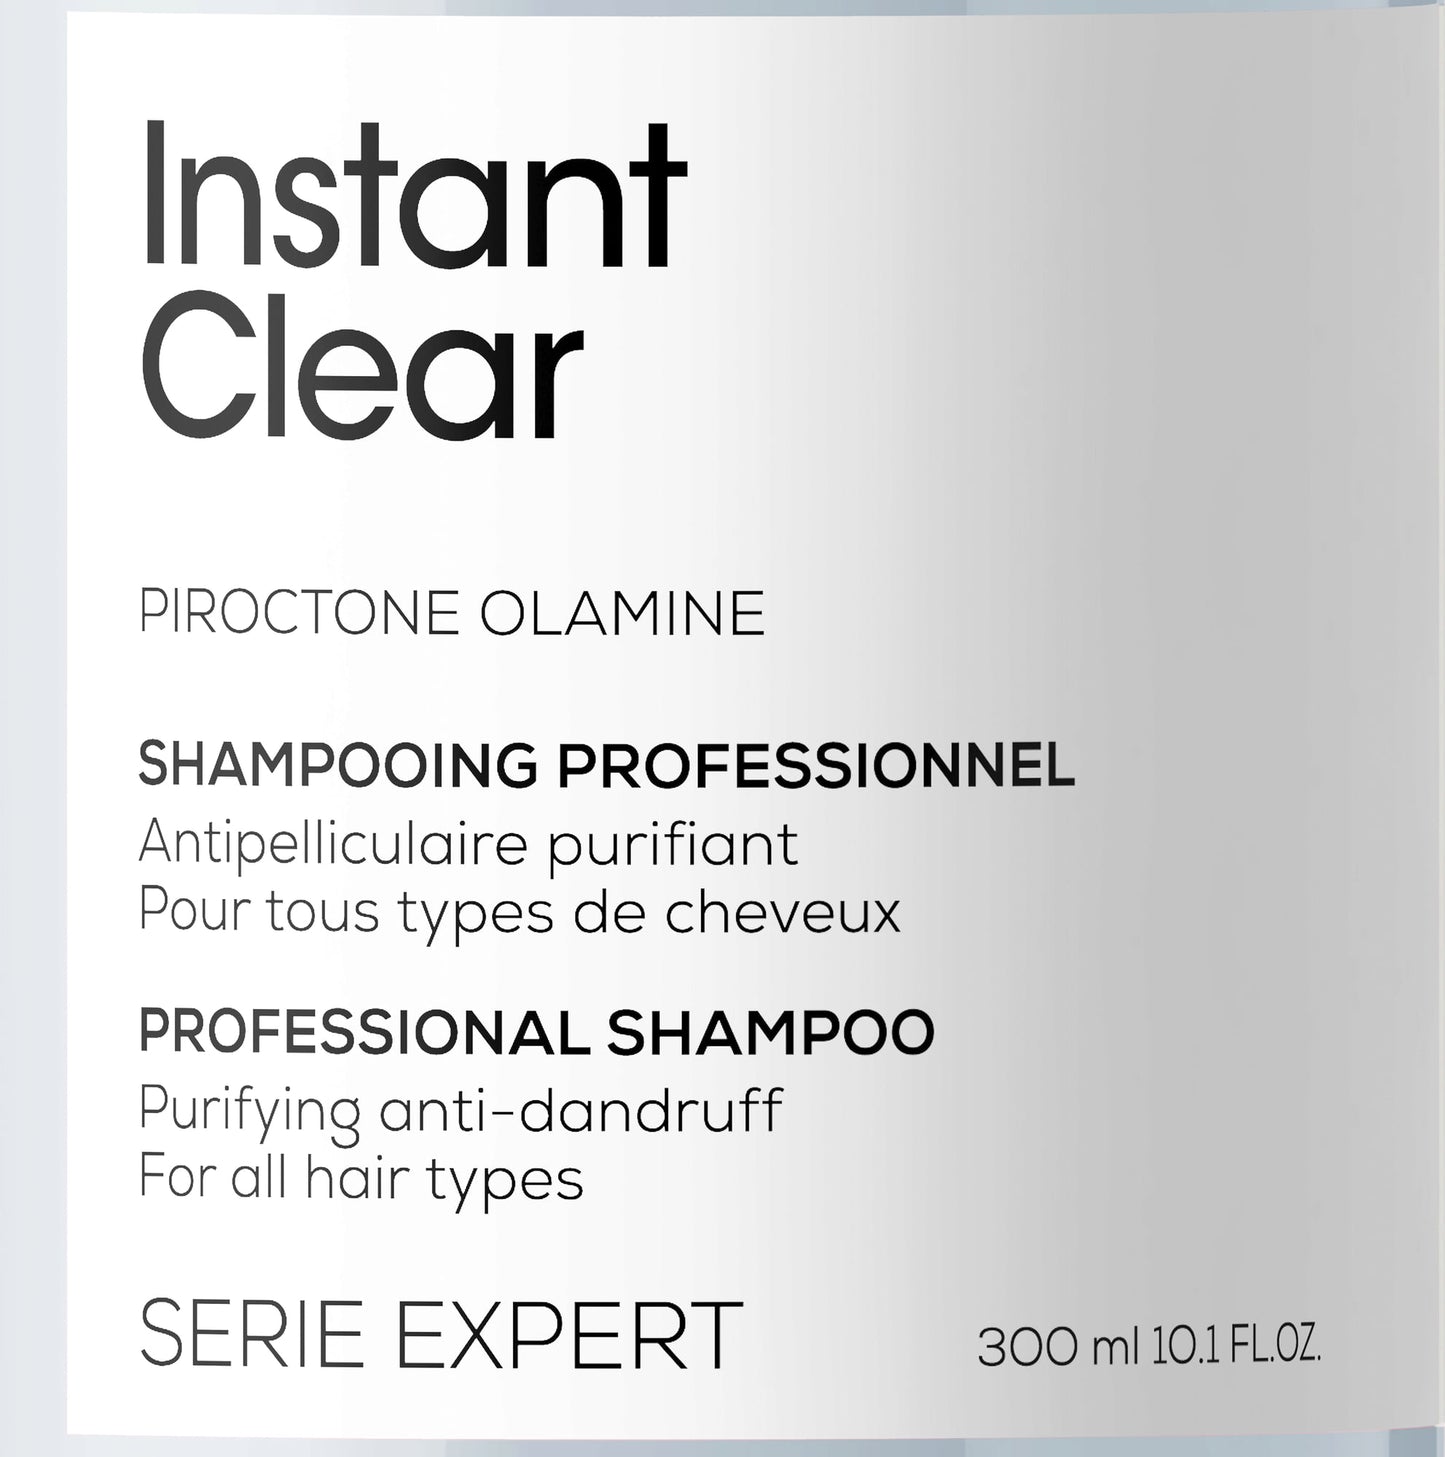 L'Oreal Instant Clear Shampoo